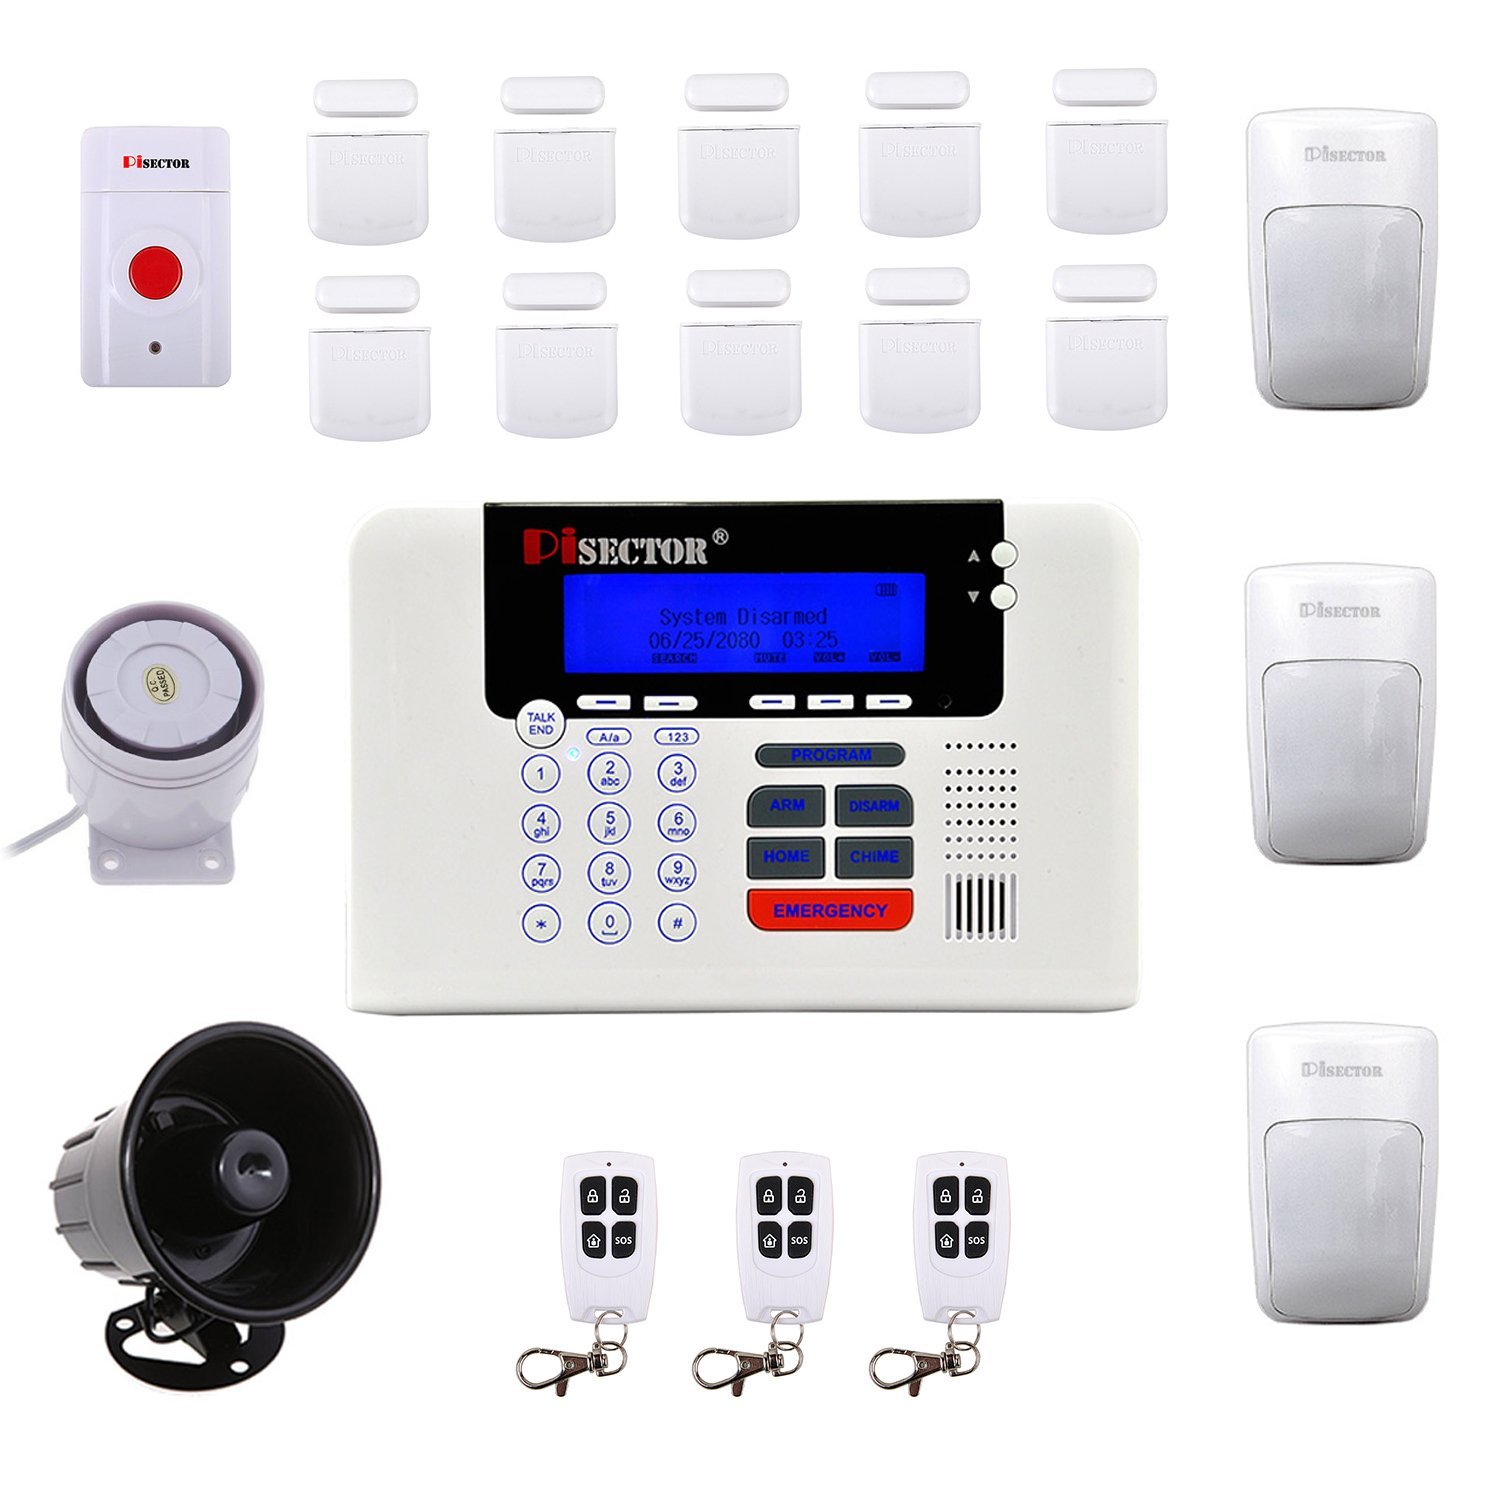 Pisector Professional Wireless Home Security Alarm System Kit with Auto Dial PS03-M